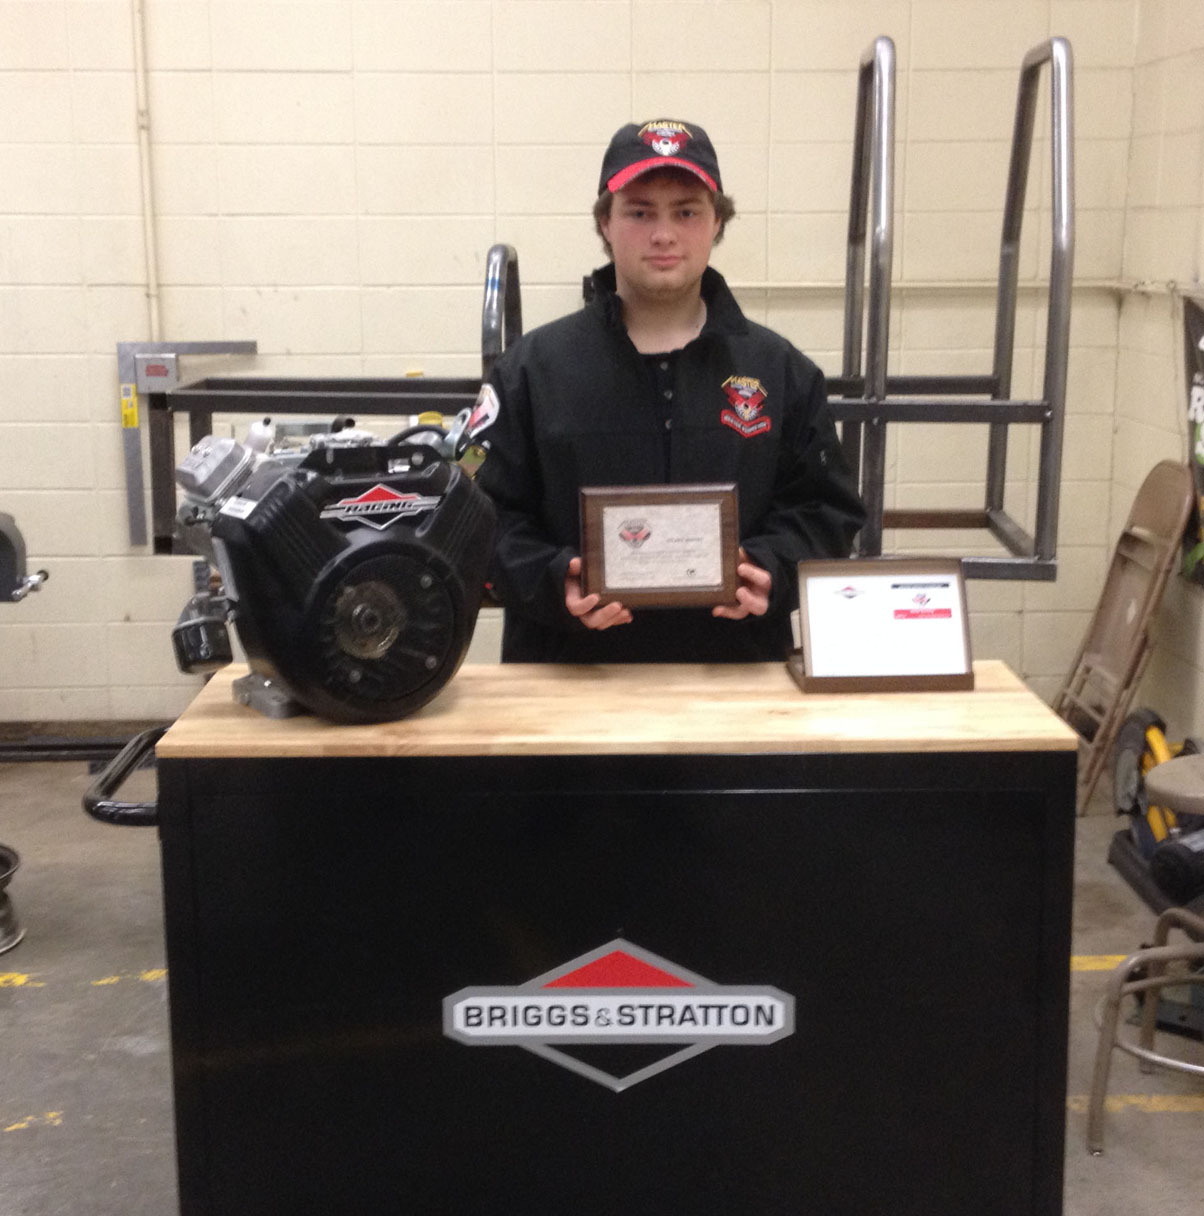 Receiving a certificate for having achieved the Briggs and Stratton MST, master service technician, rating, Homer High School junior Nolan Bunting also was gifted by the company with other items. Bunting is enrolled in Homer High’s small engine class taught by Cam Wyatt.-Photo provided